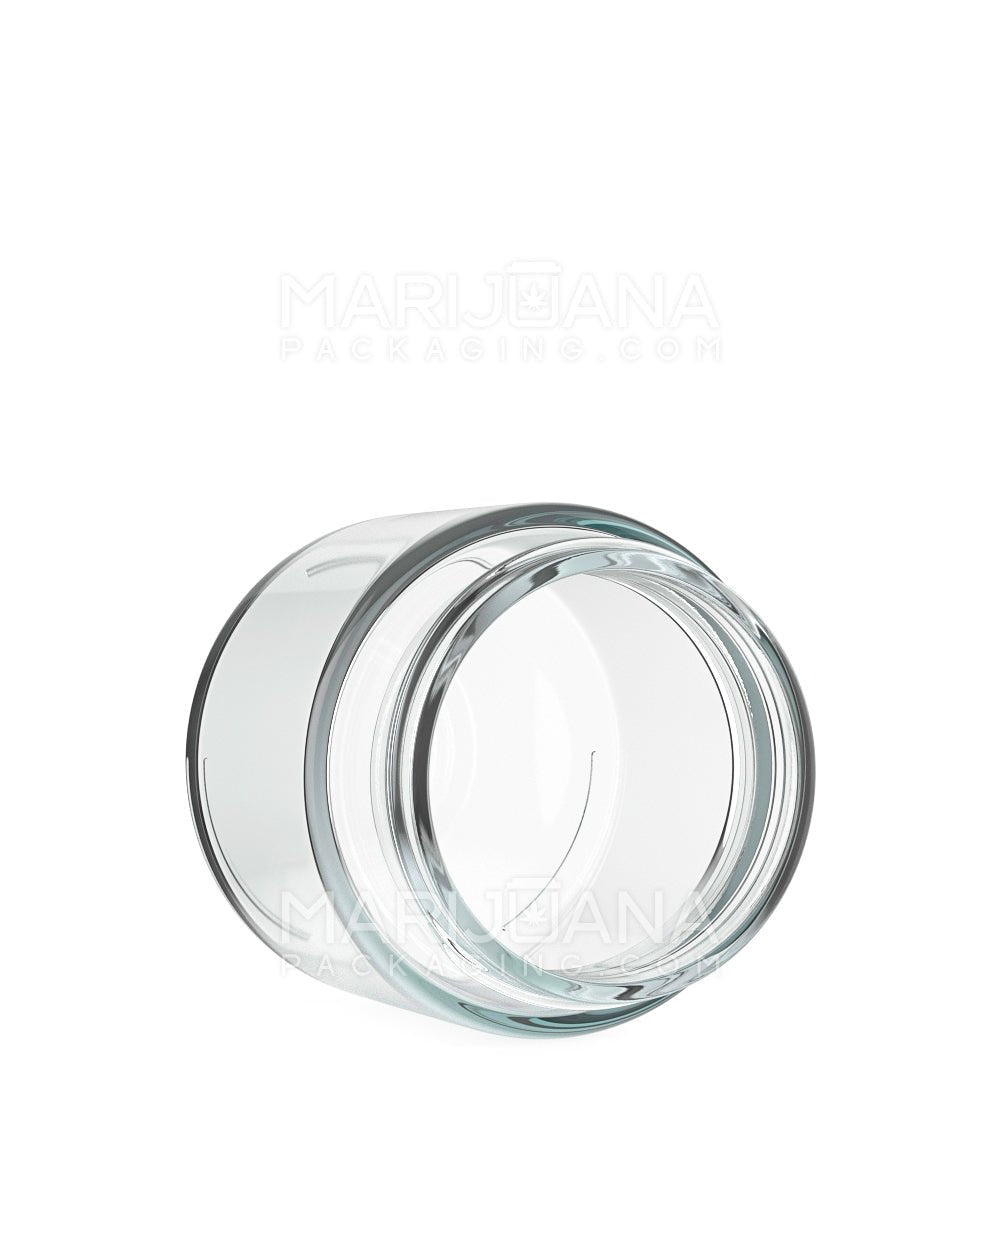 Straight Sided Clear Glass Jars | 53mm - 3oz - 32 Count - 4